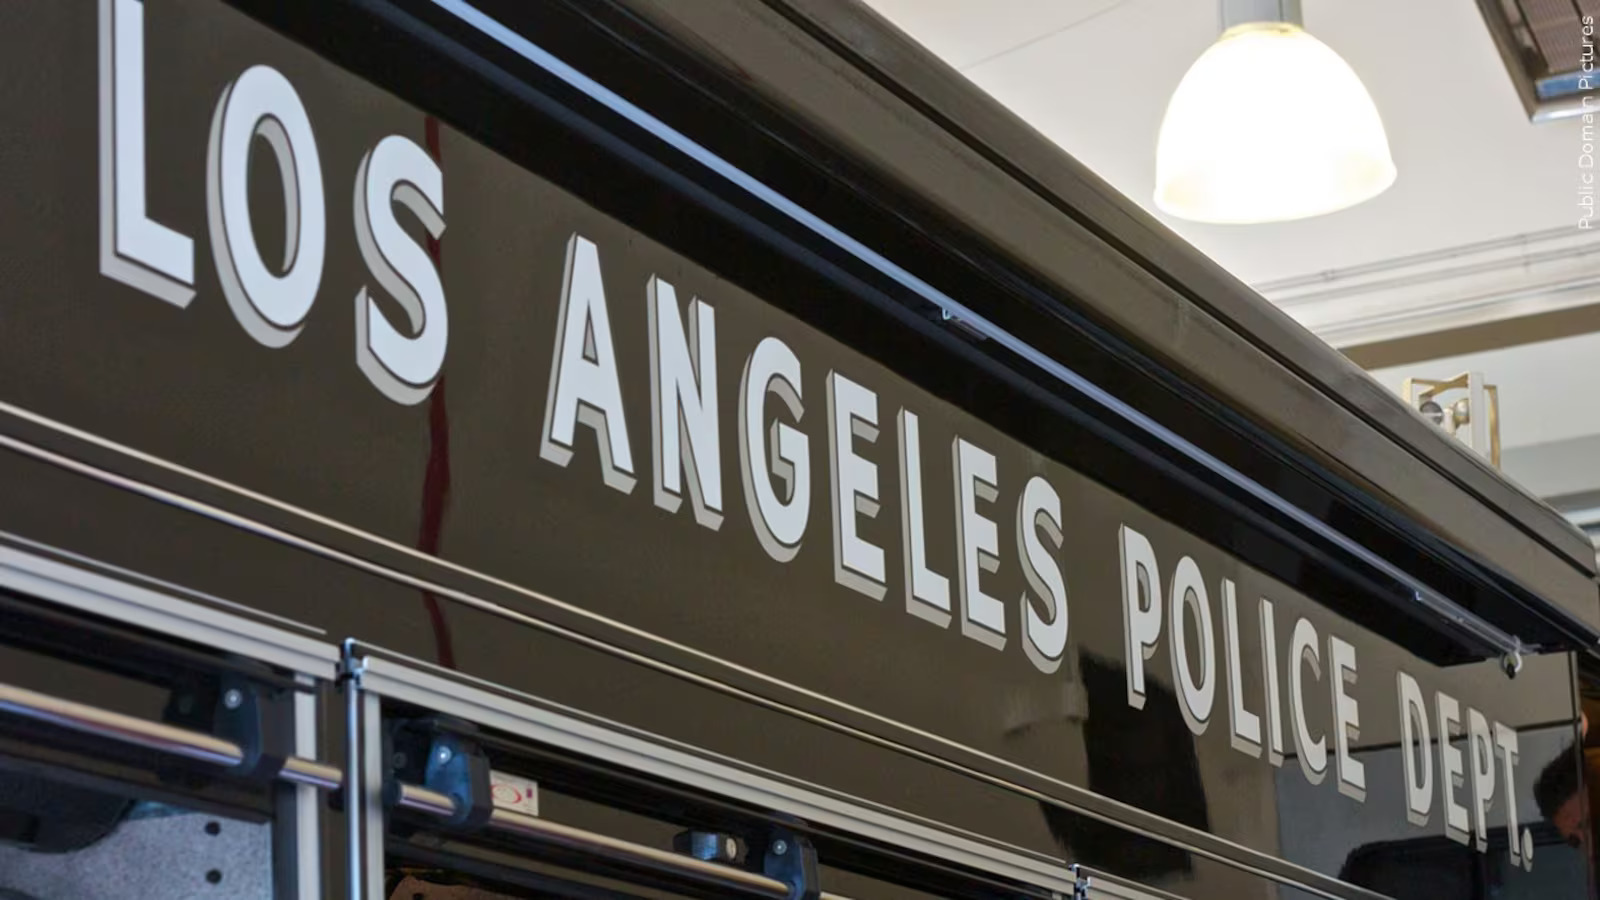 Police Report: Burglars Make Off with $30 Million Cash from Los Angeles Money Storage Facility